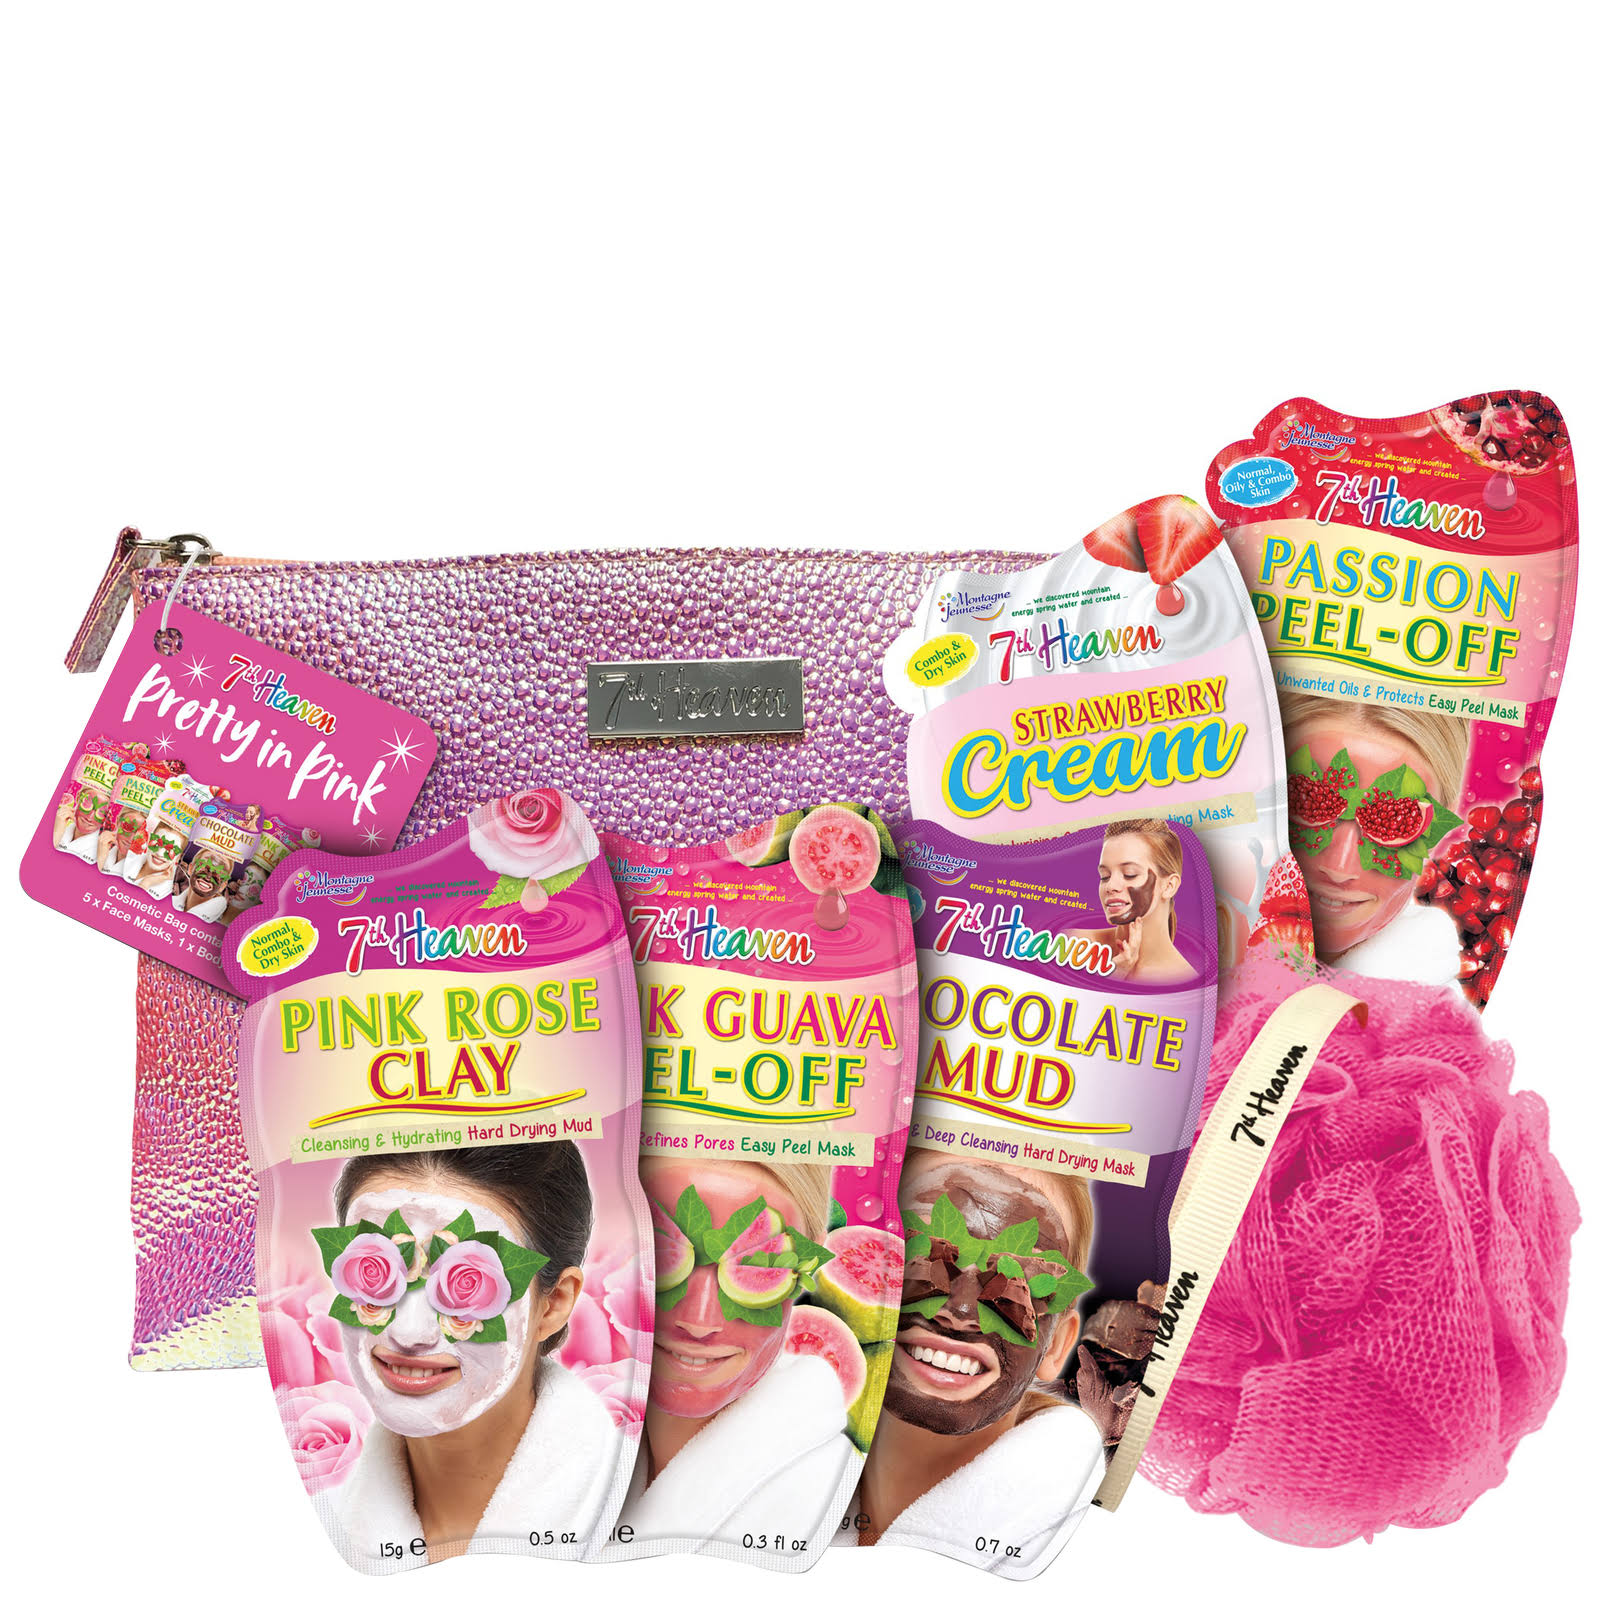 7th Heaven - Gift Sets Pretty in Pink Gift Set For Women